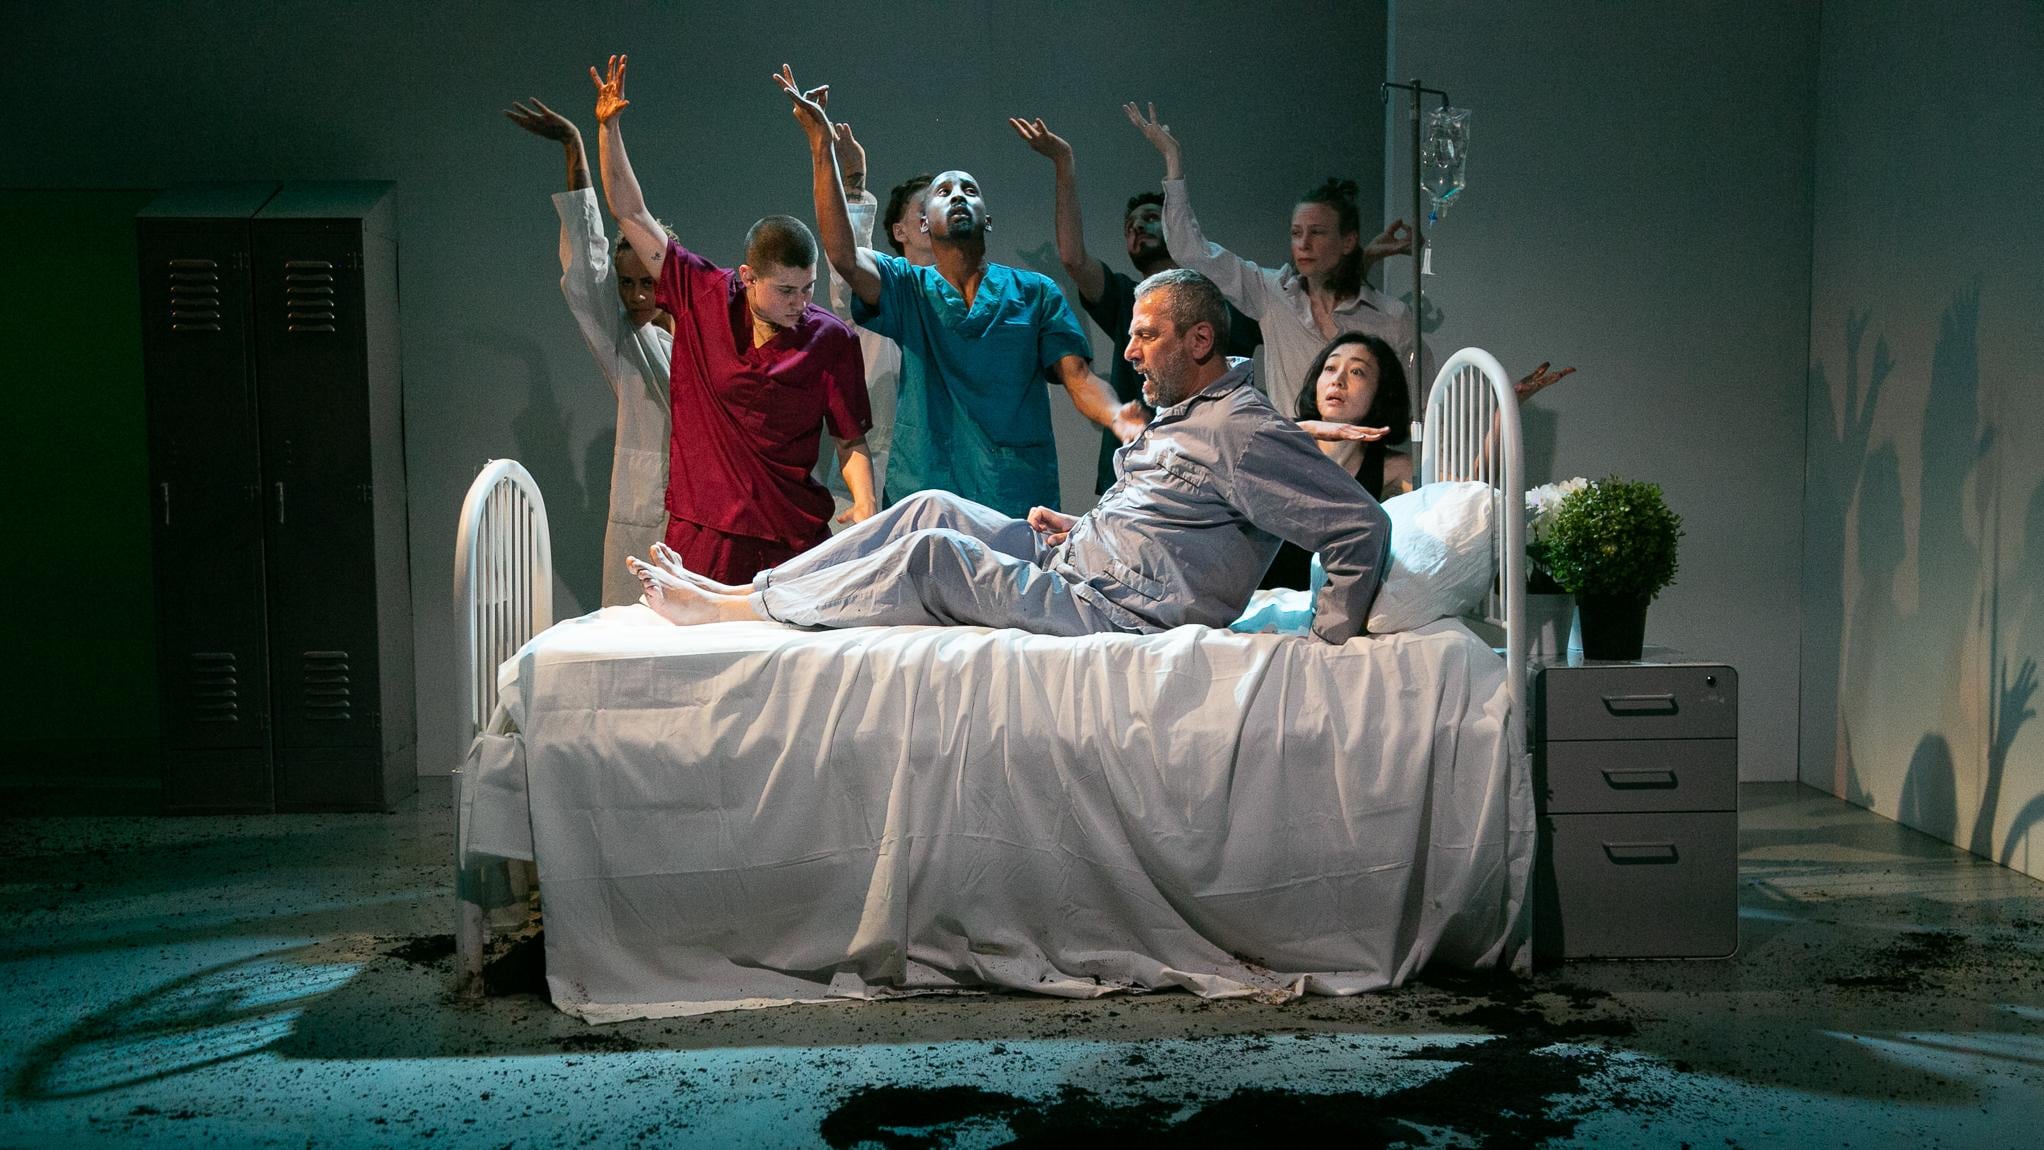 Dancers dressed as caregivers, surrounding a man on a hospital bed 